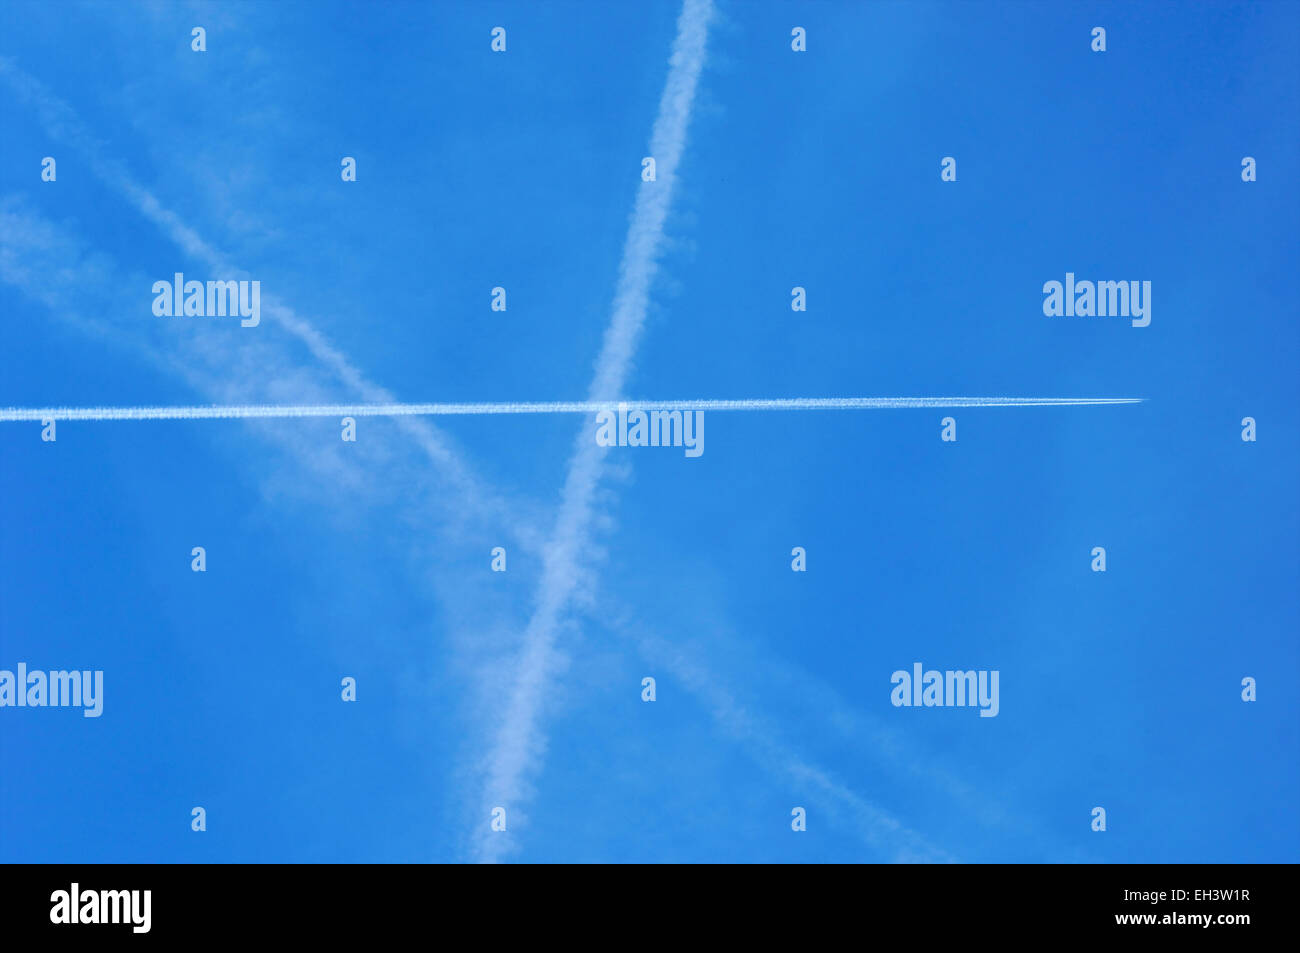 Blue sky with chemtrails or contrails in the air on a sunny day Stock Photo